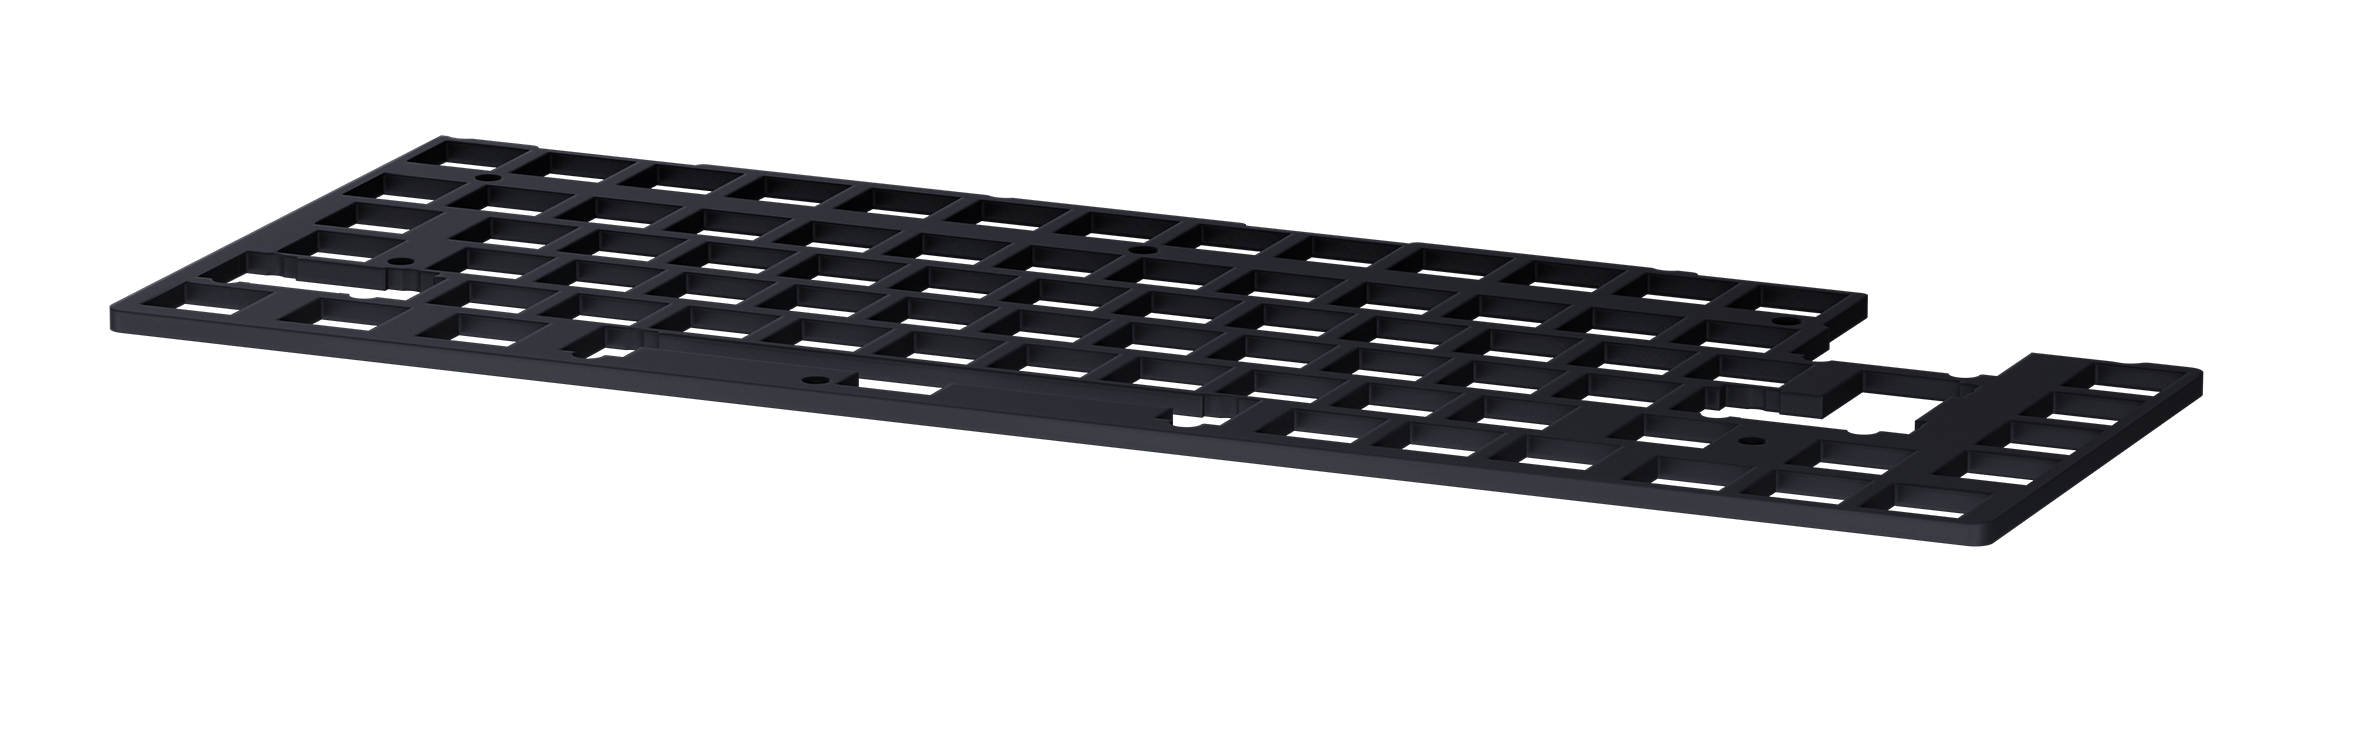  ASUS ROG Azoth 75 Wireless DIY Custom Gaming Keyboard, OLED  display, Gasket-Mount, Three-Layer Dampening, Hot-Swappable Pre-lubed ROG  NX Storm Switches & Keyboard Stabilizers, PBT Keycaps, RGB - White :  Electronics